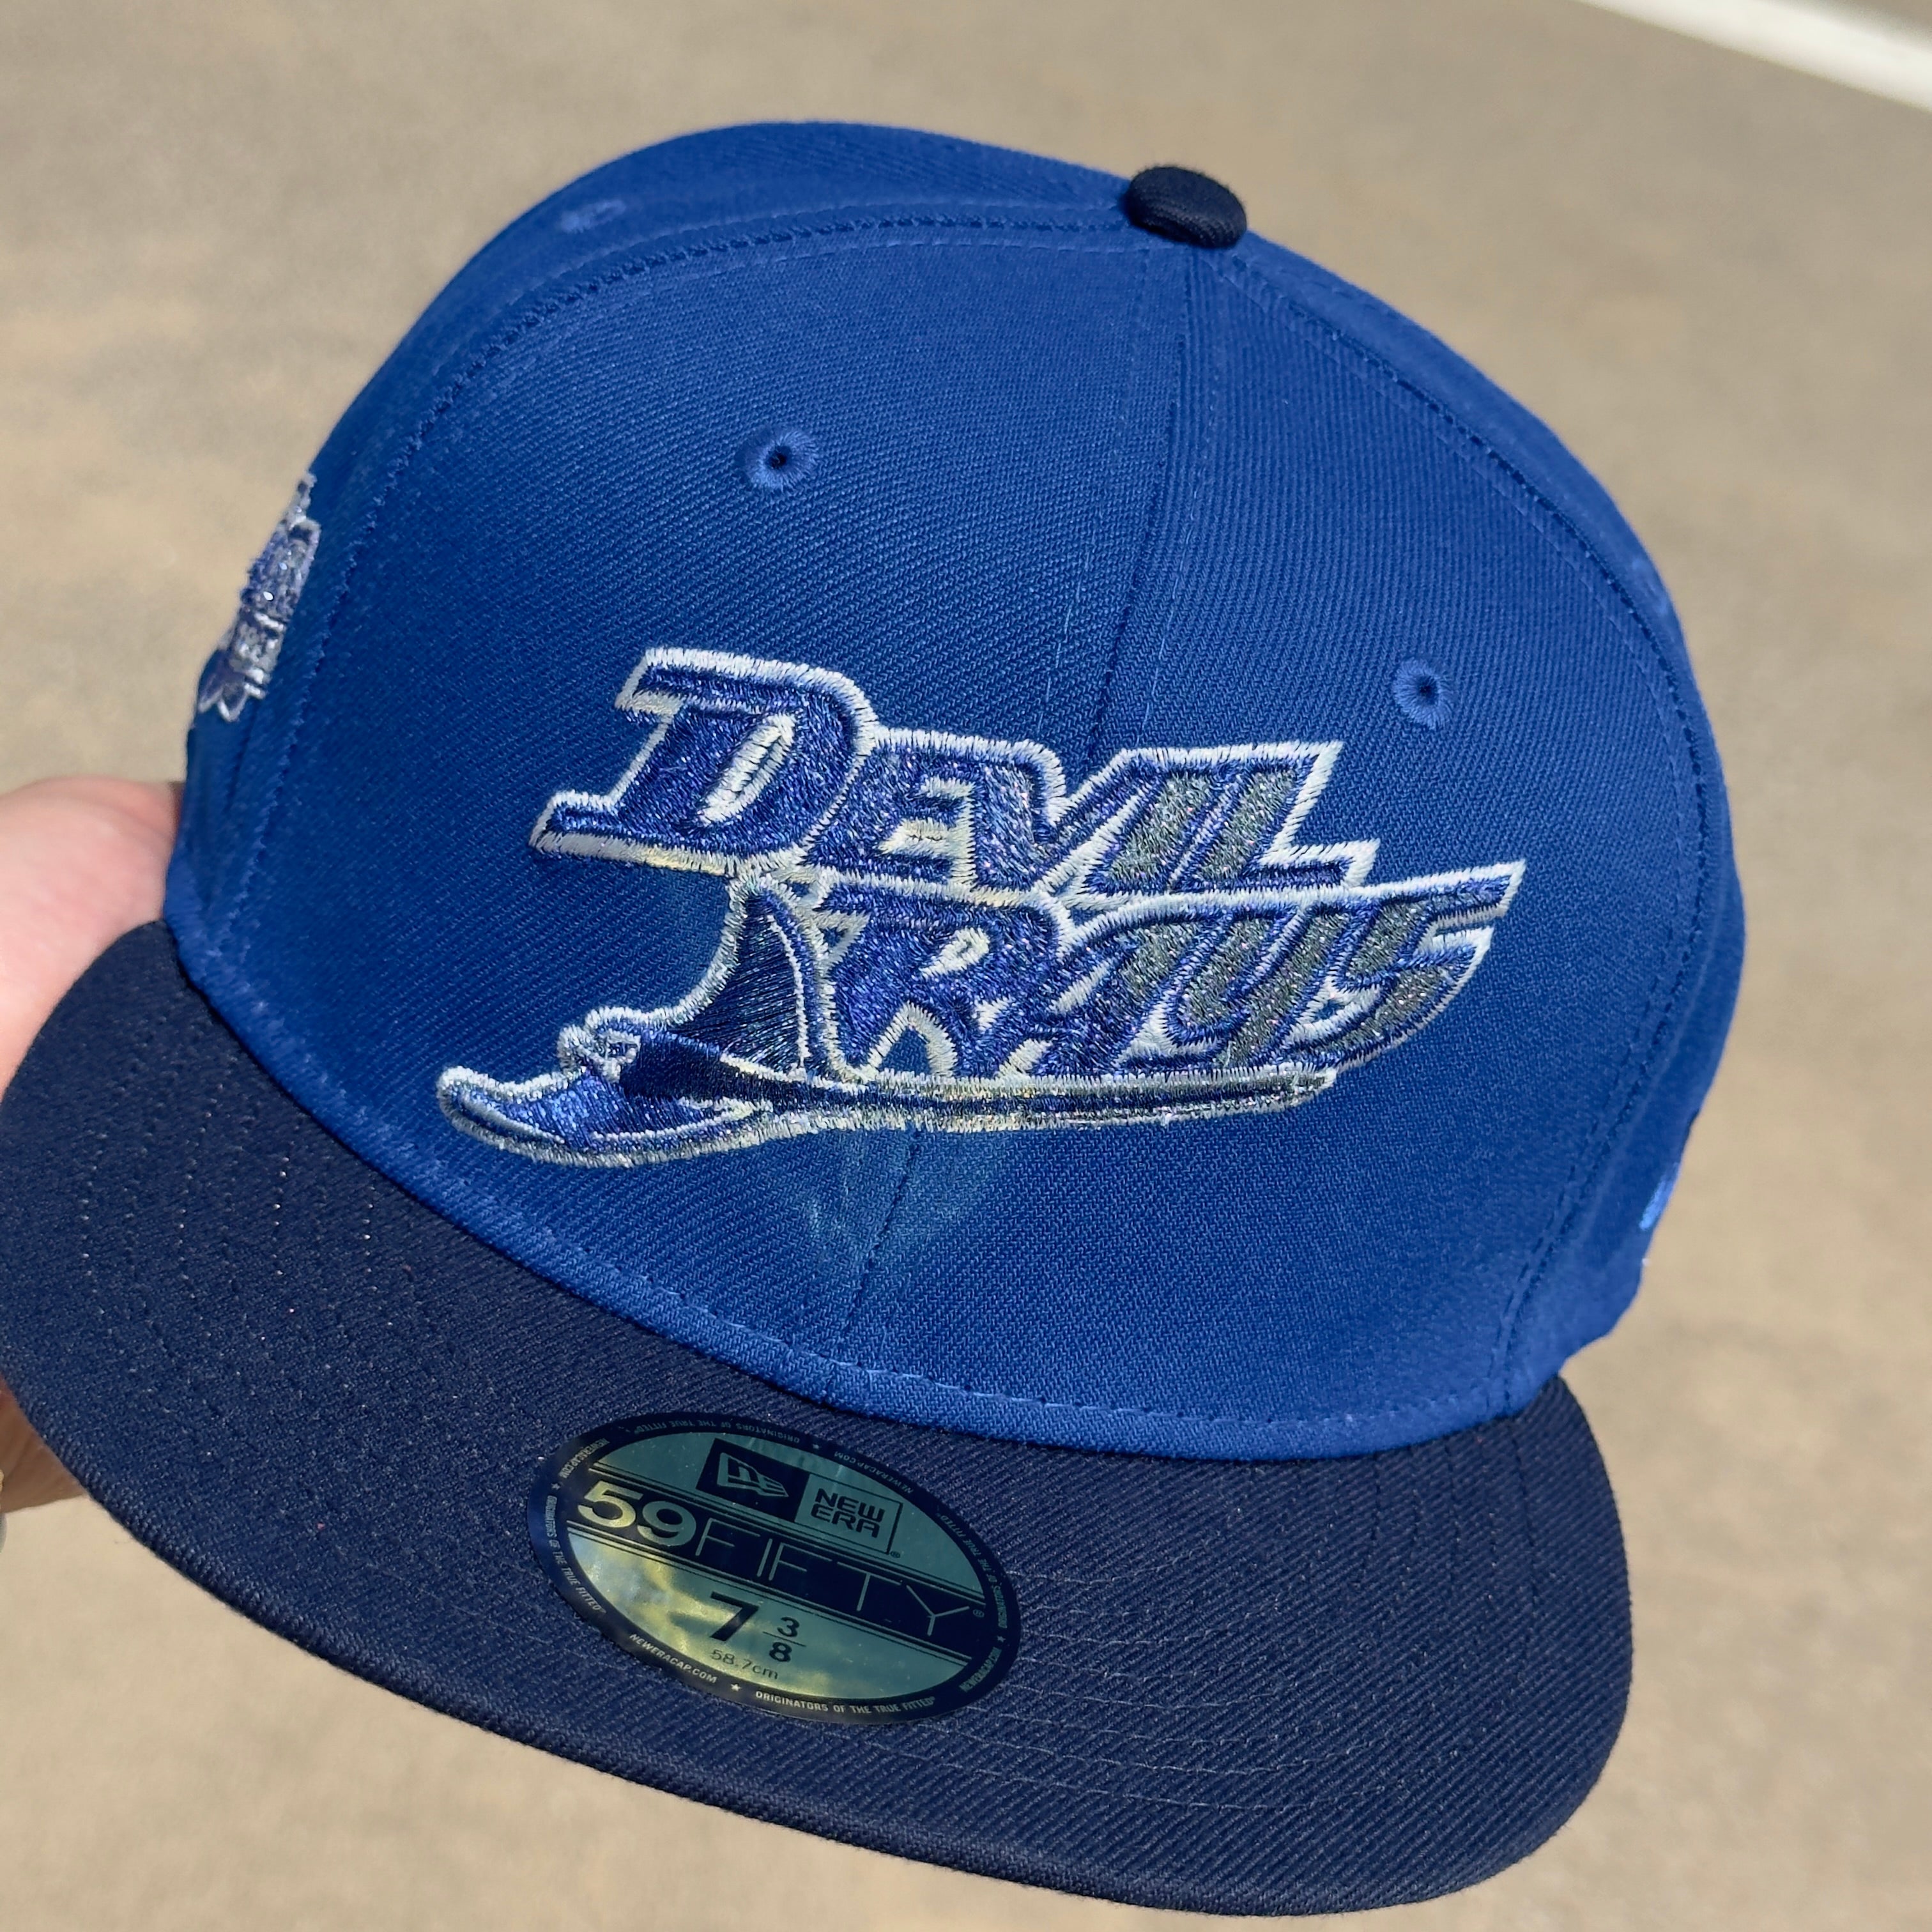 NEW Blue Tampa Devil Rays Inaugural Season 1998 59fifty New Era Fitted Hat Cap